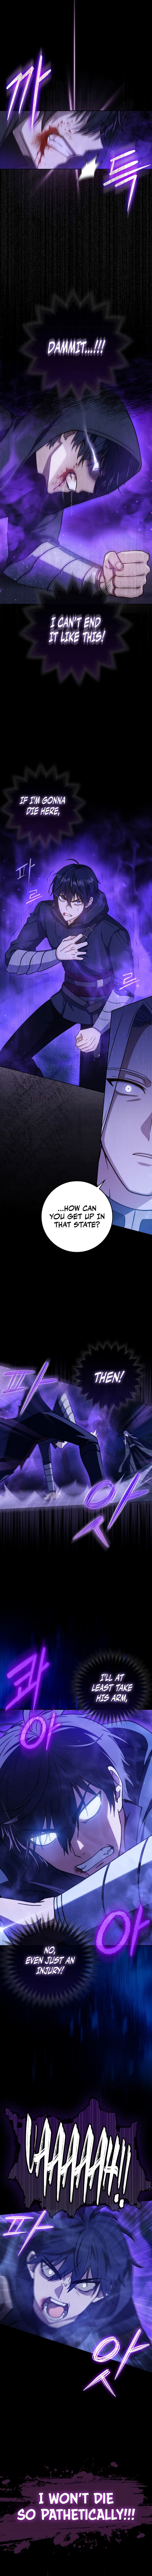 The Reincarnated Assassin Is A Swordmaster Chapter 1 Page 6